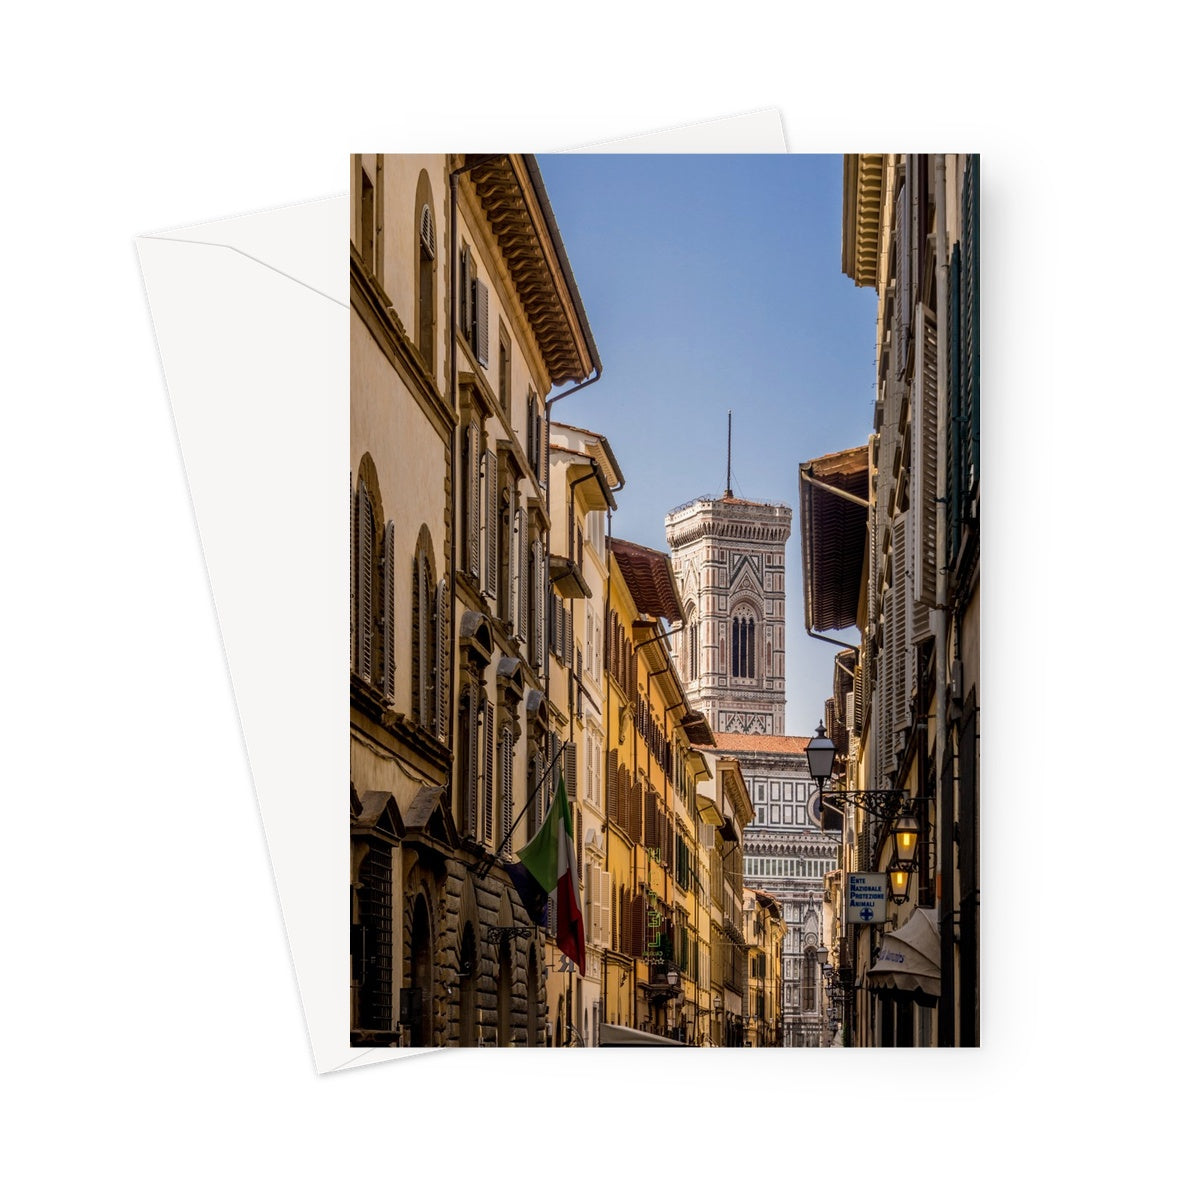 Giotto's Campanile glimpsed between buildings in the city of Florence, Italy. Greeting Card